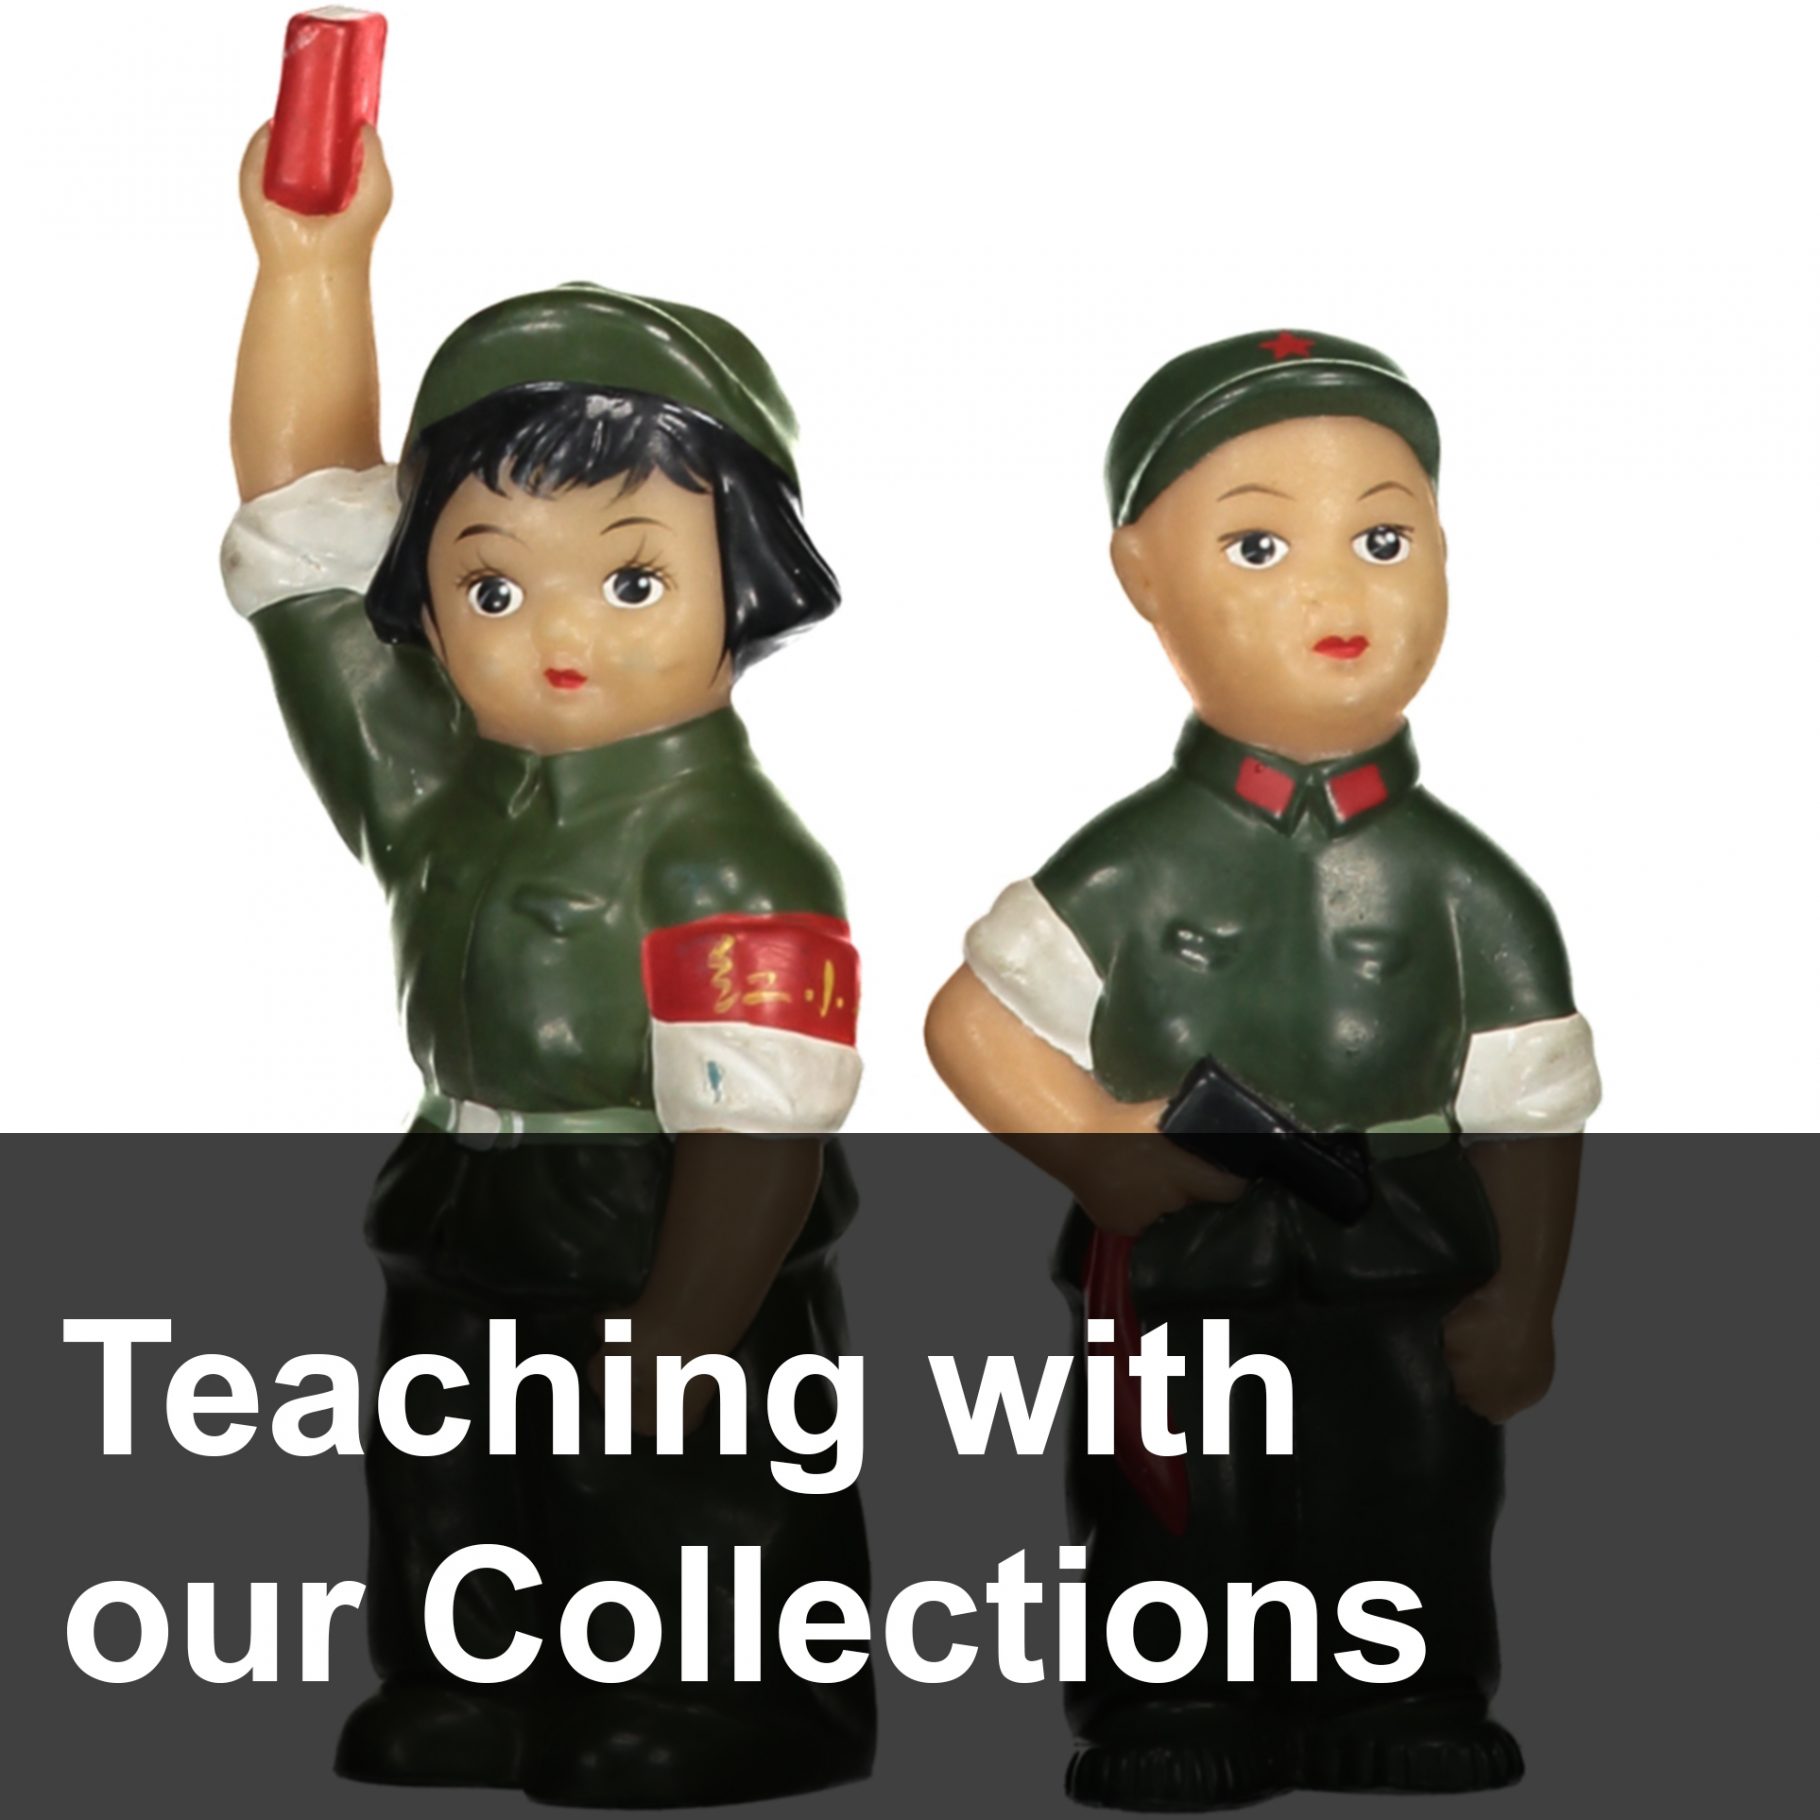 Teaching with our collections